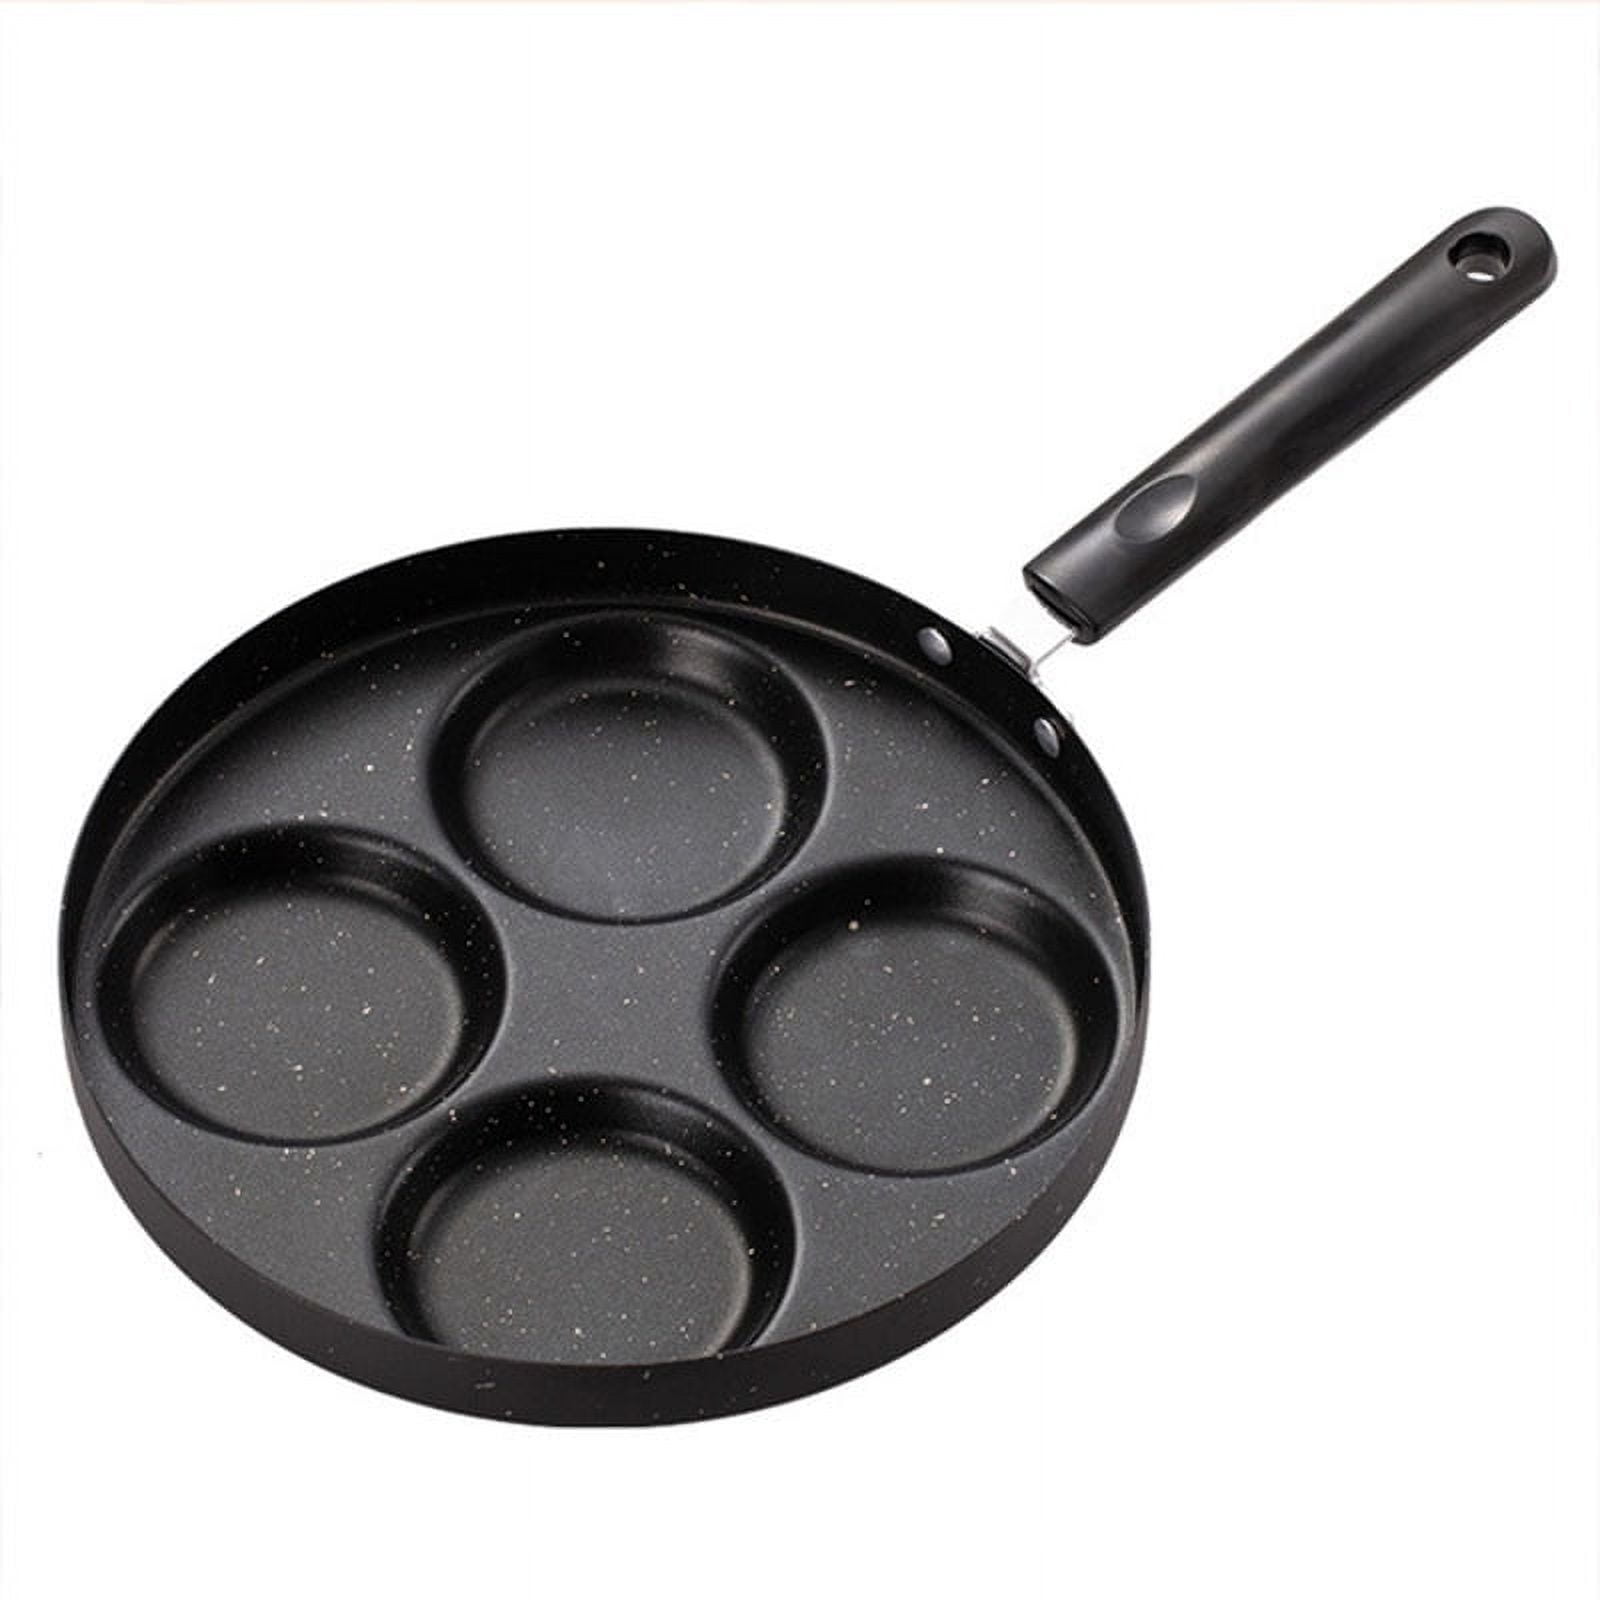  Lchkrep Four-cup egg pan, medical stone non-stick frying pan,  Multi Egg Frying Pan, Compatible with all heat sources (3-inch eggs): Home  & Kitchen